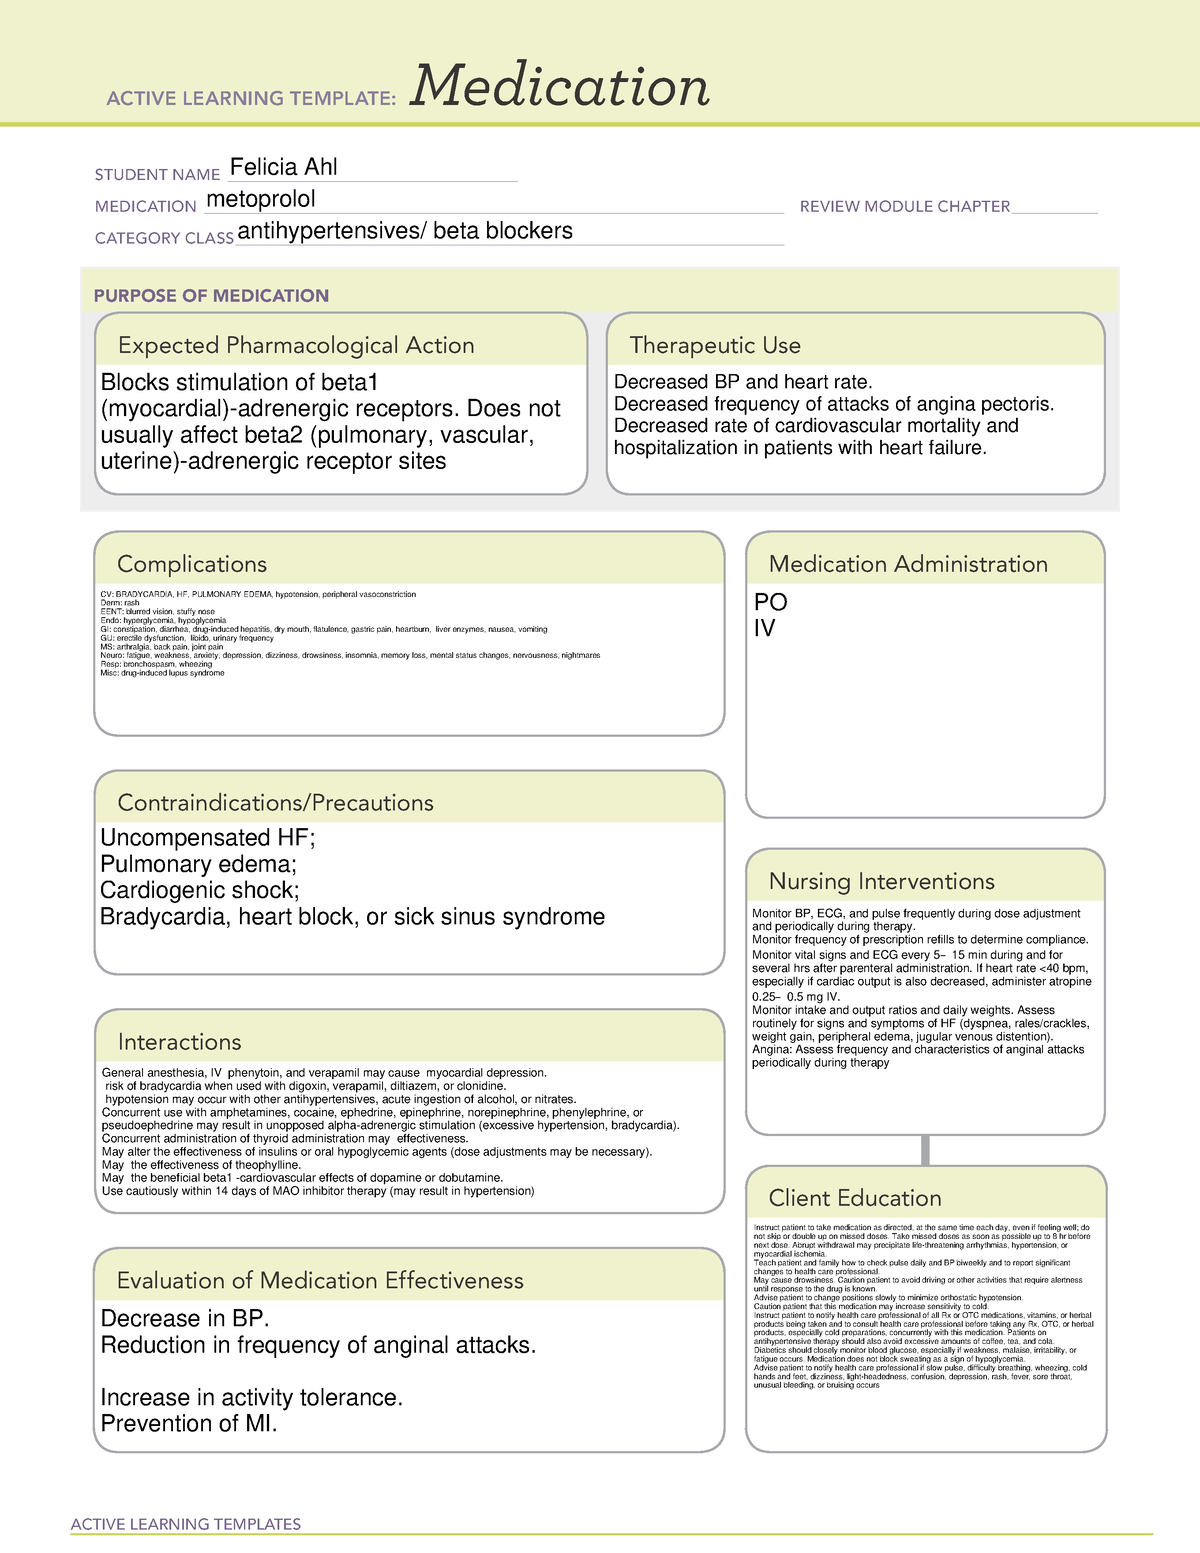 Metoprolol drug cards ACTIVE LEARNING TEMPLATES Medication STUDENT